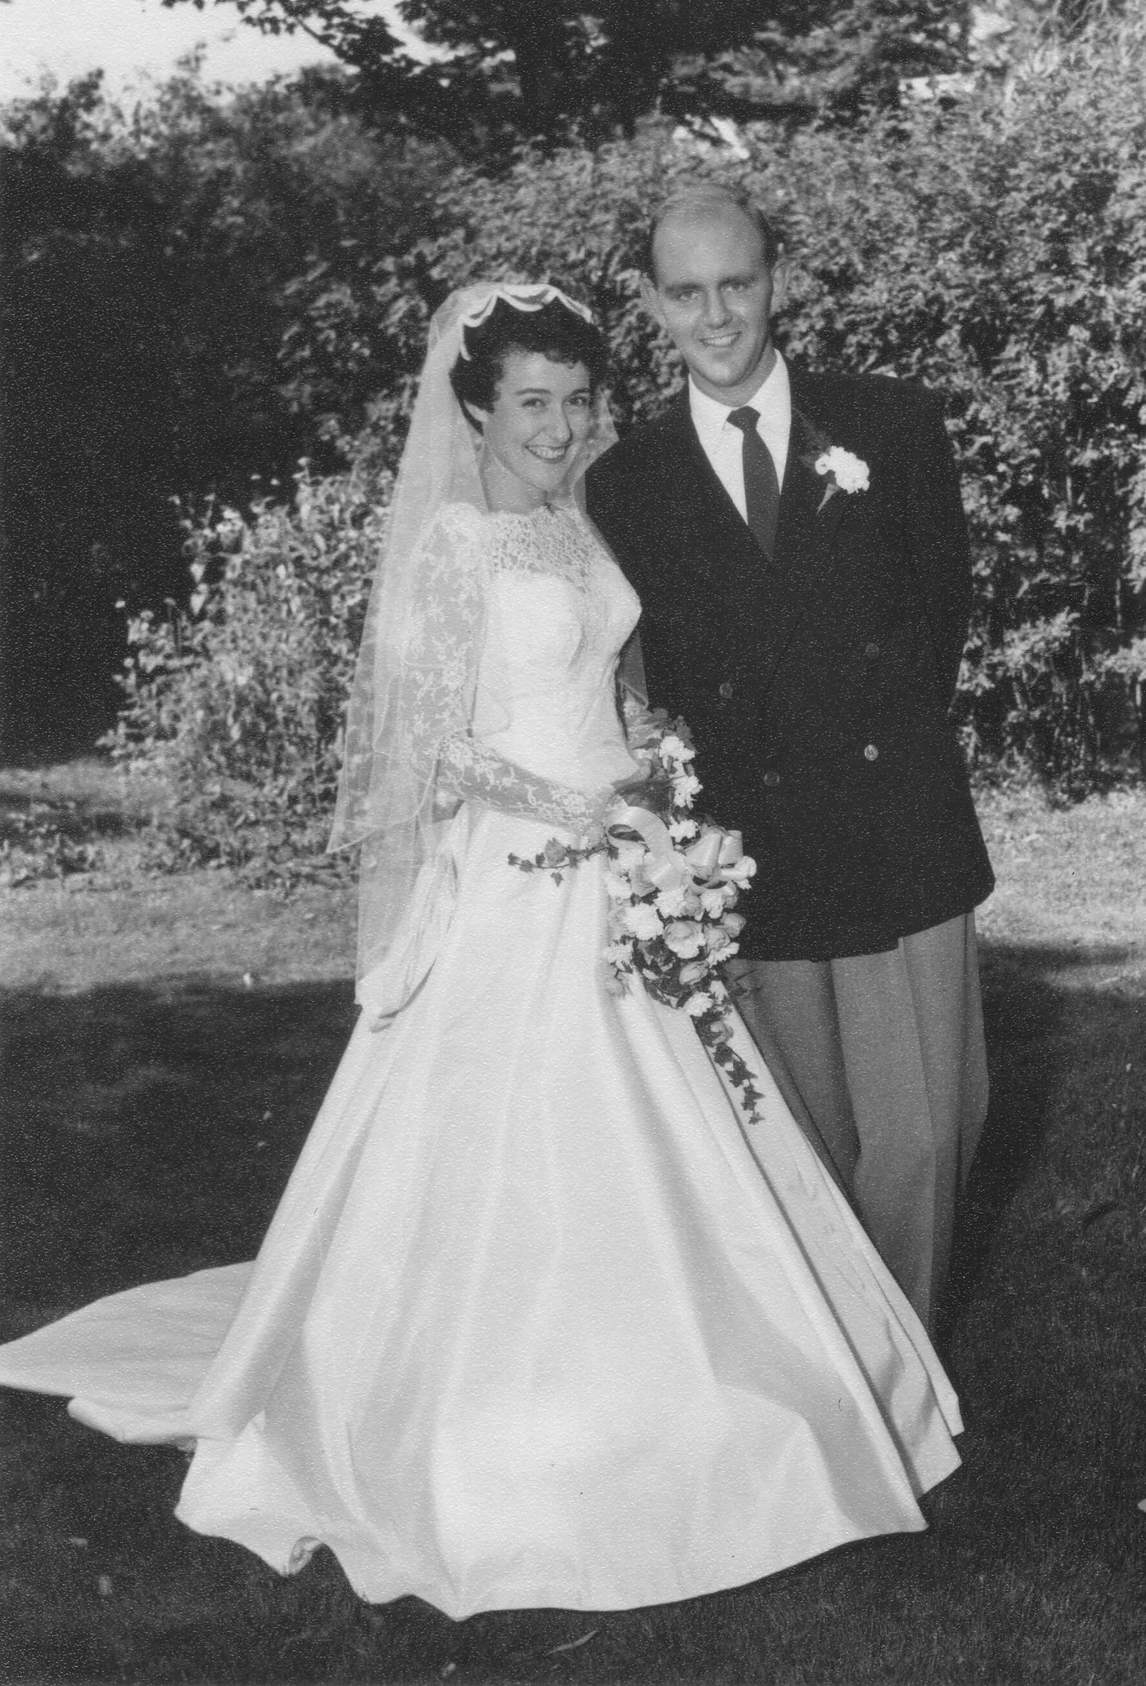 Mary and Christopher Pratt on their wedding day, 1957